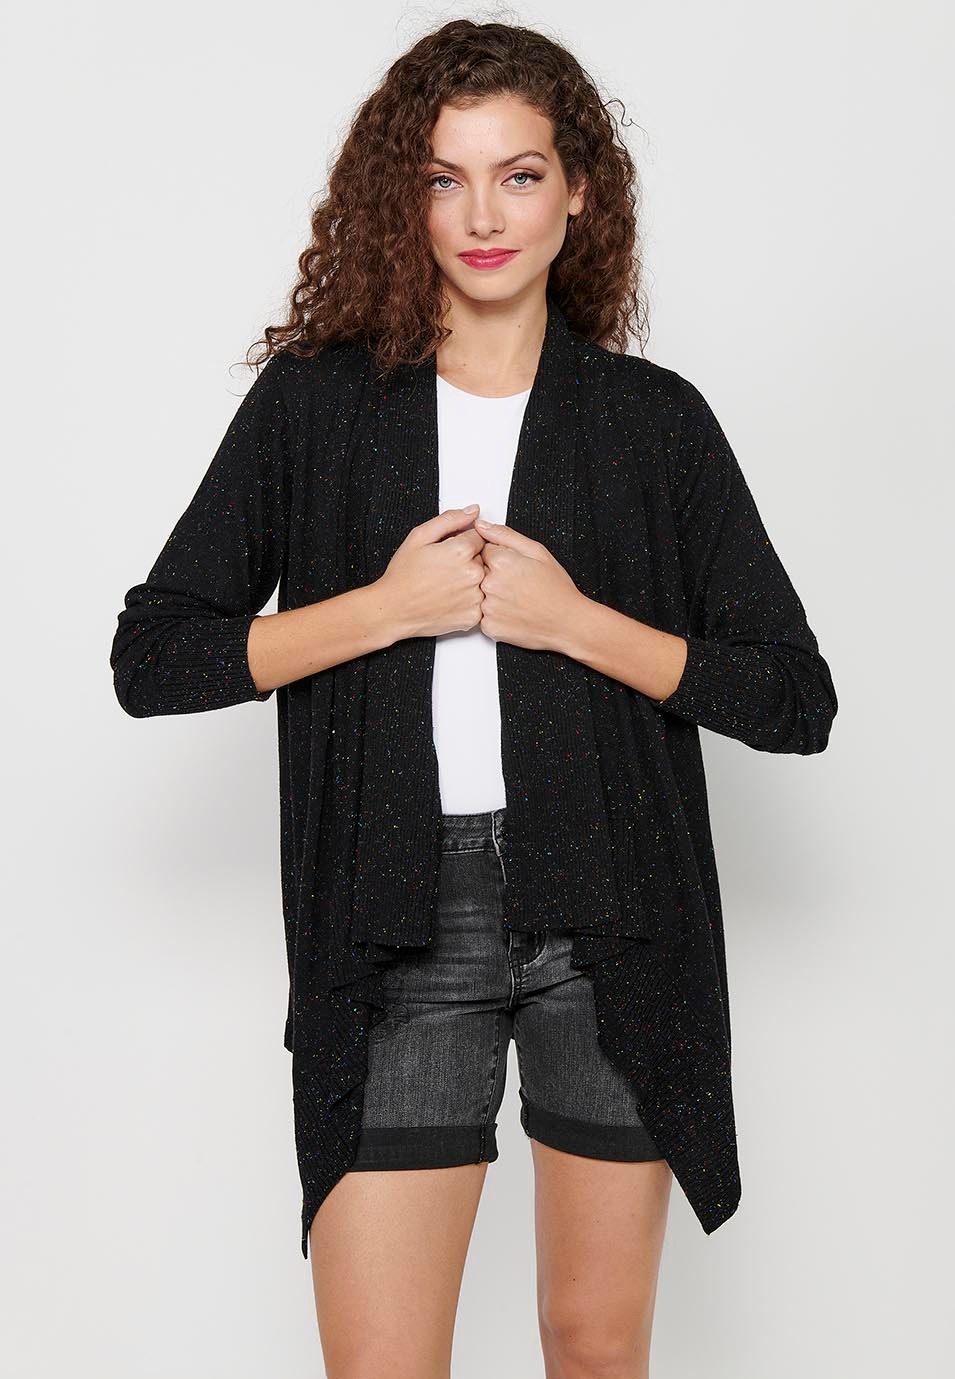 Long-sleeved tricot jacket with asymmetrical finish. Black Marbled Tricot for Women 7